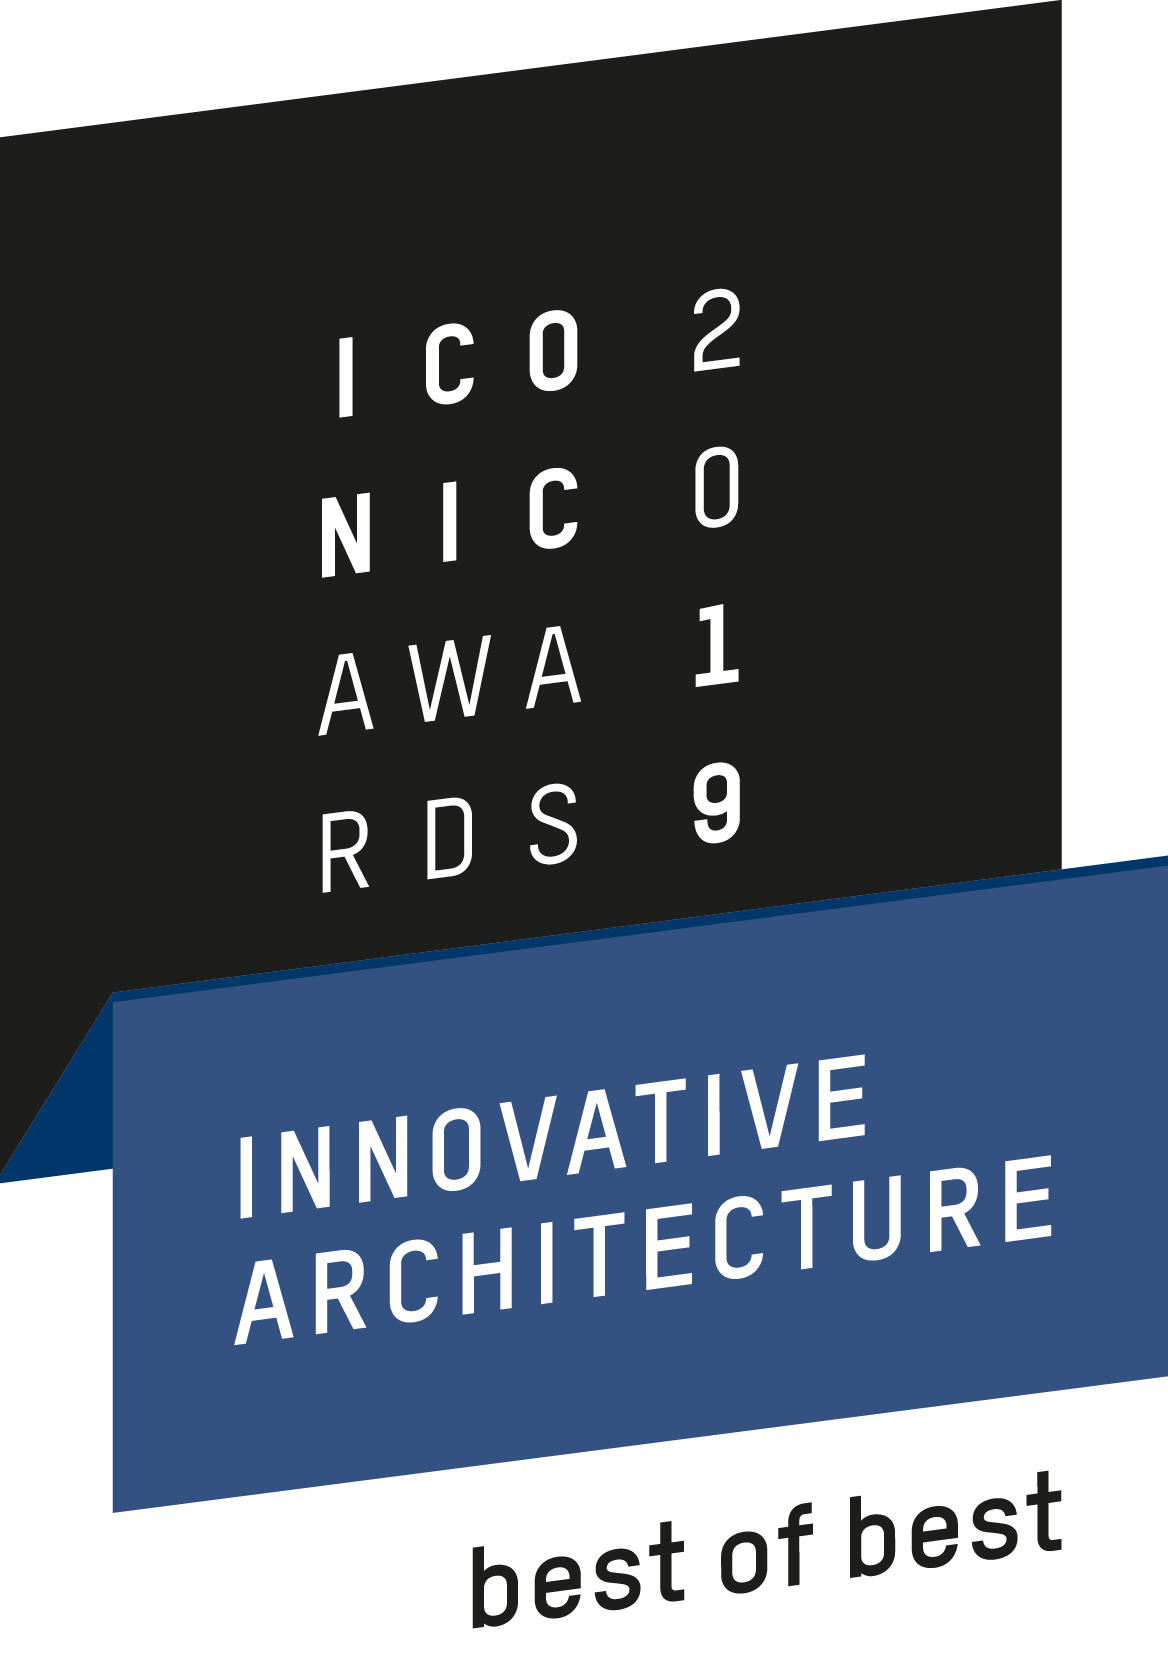 ICONIC Award 2019, Innovative Architecture, best of best